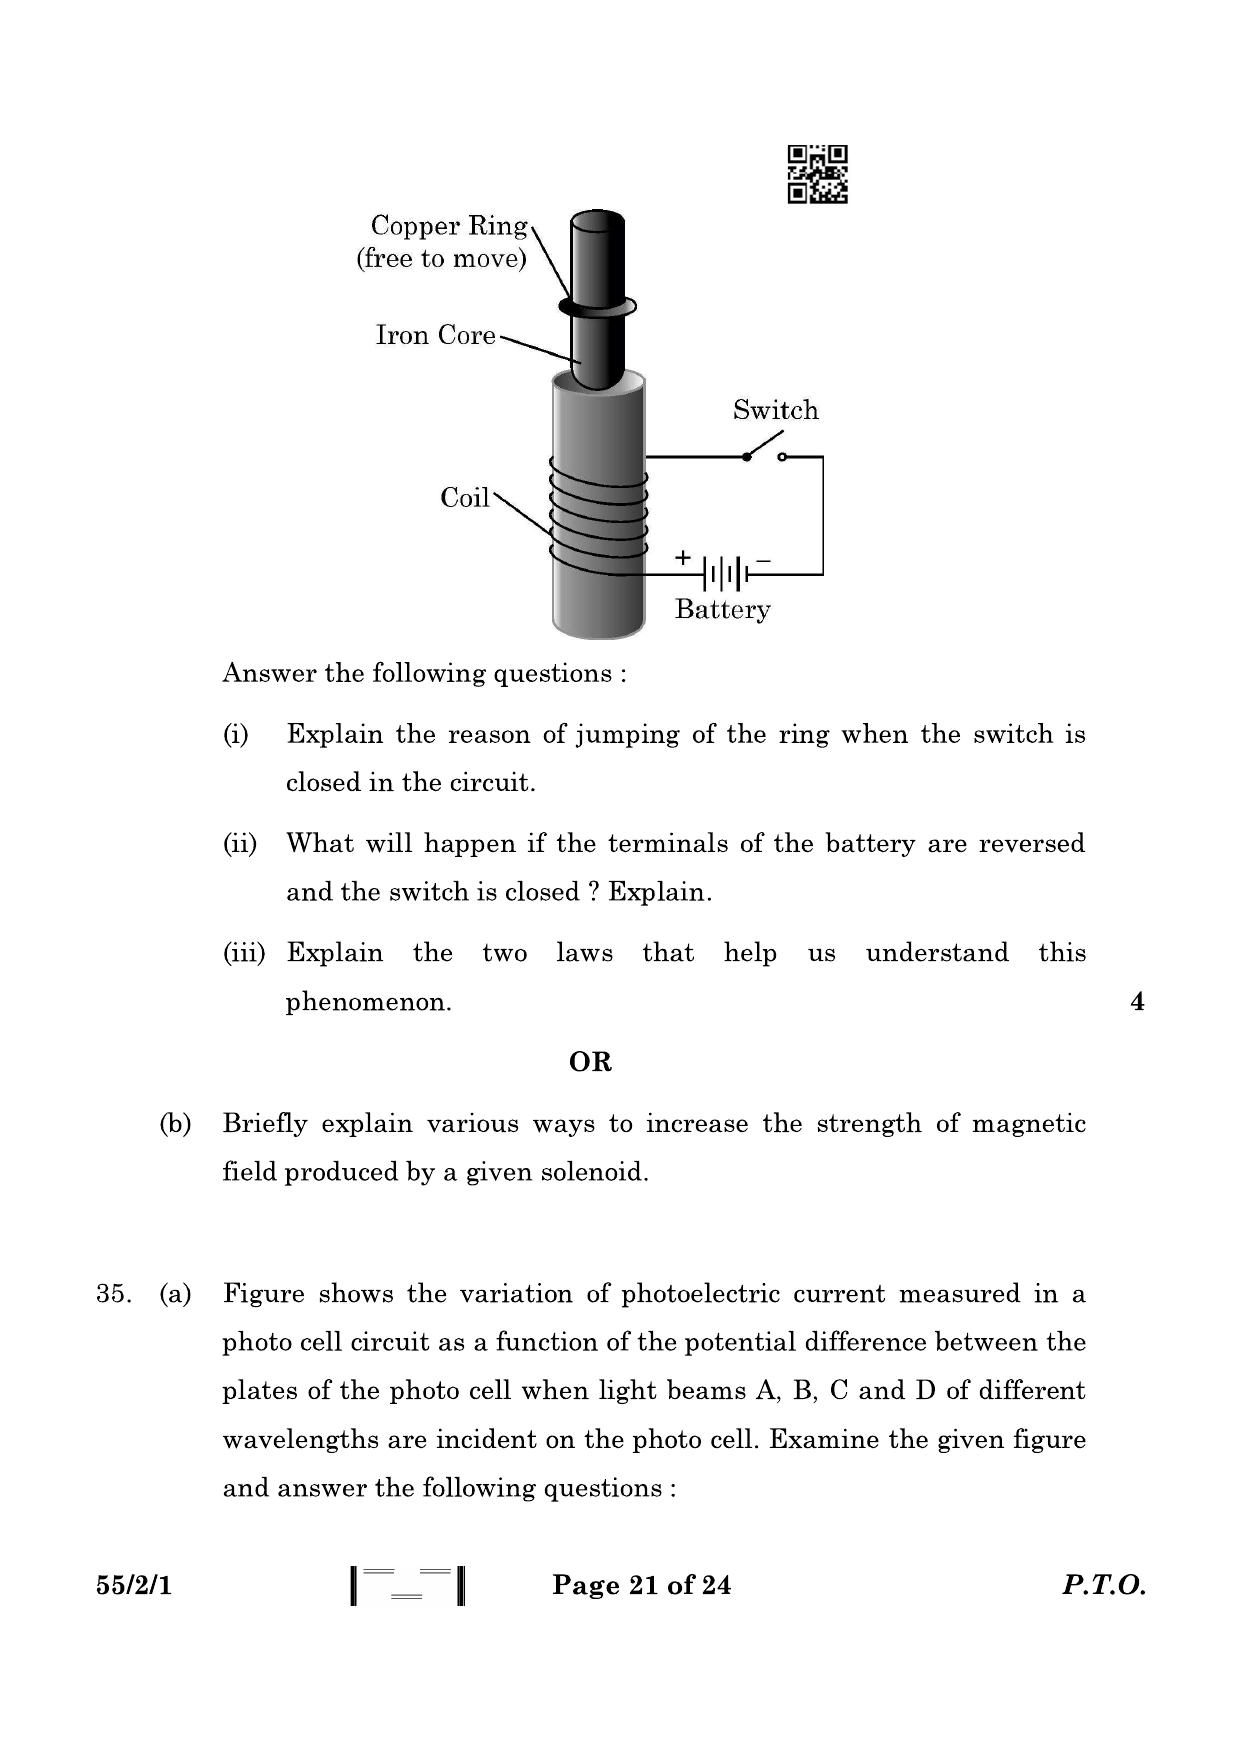 CBSE Class 12 55-2-1 Physics 2023 Question Paper - Page 21